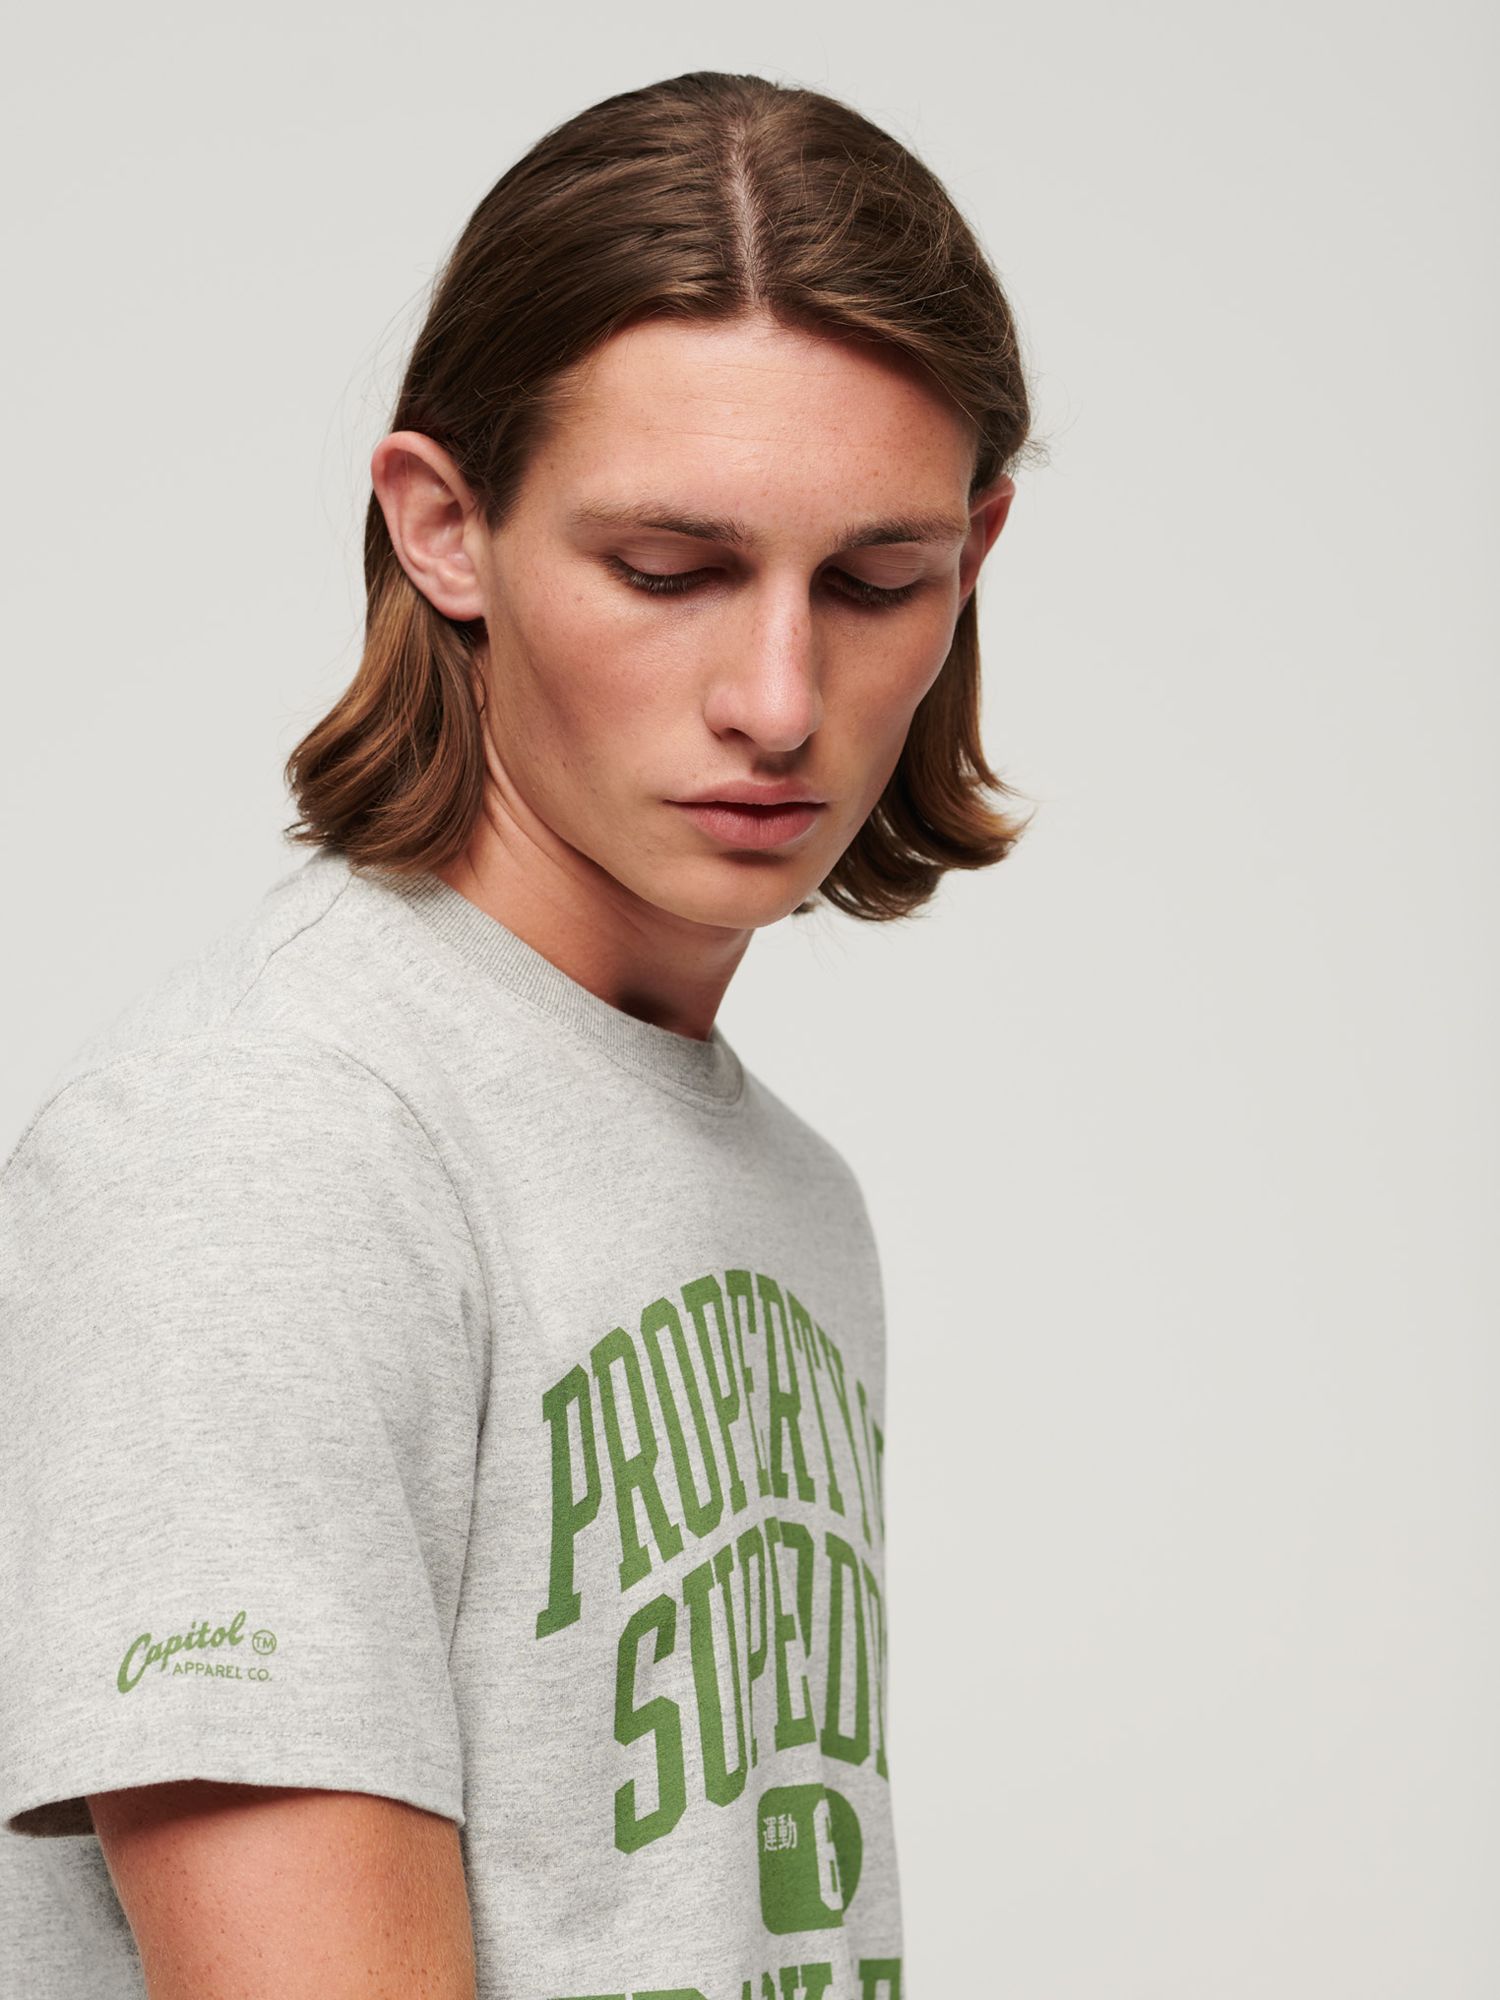 Buy Superdry Athletic College Graphic T-Shirt Online at johnlewis.com